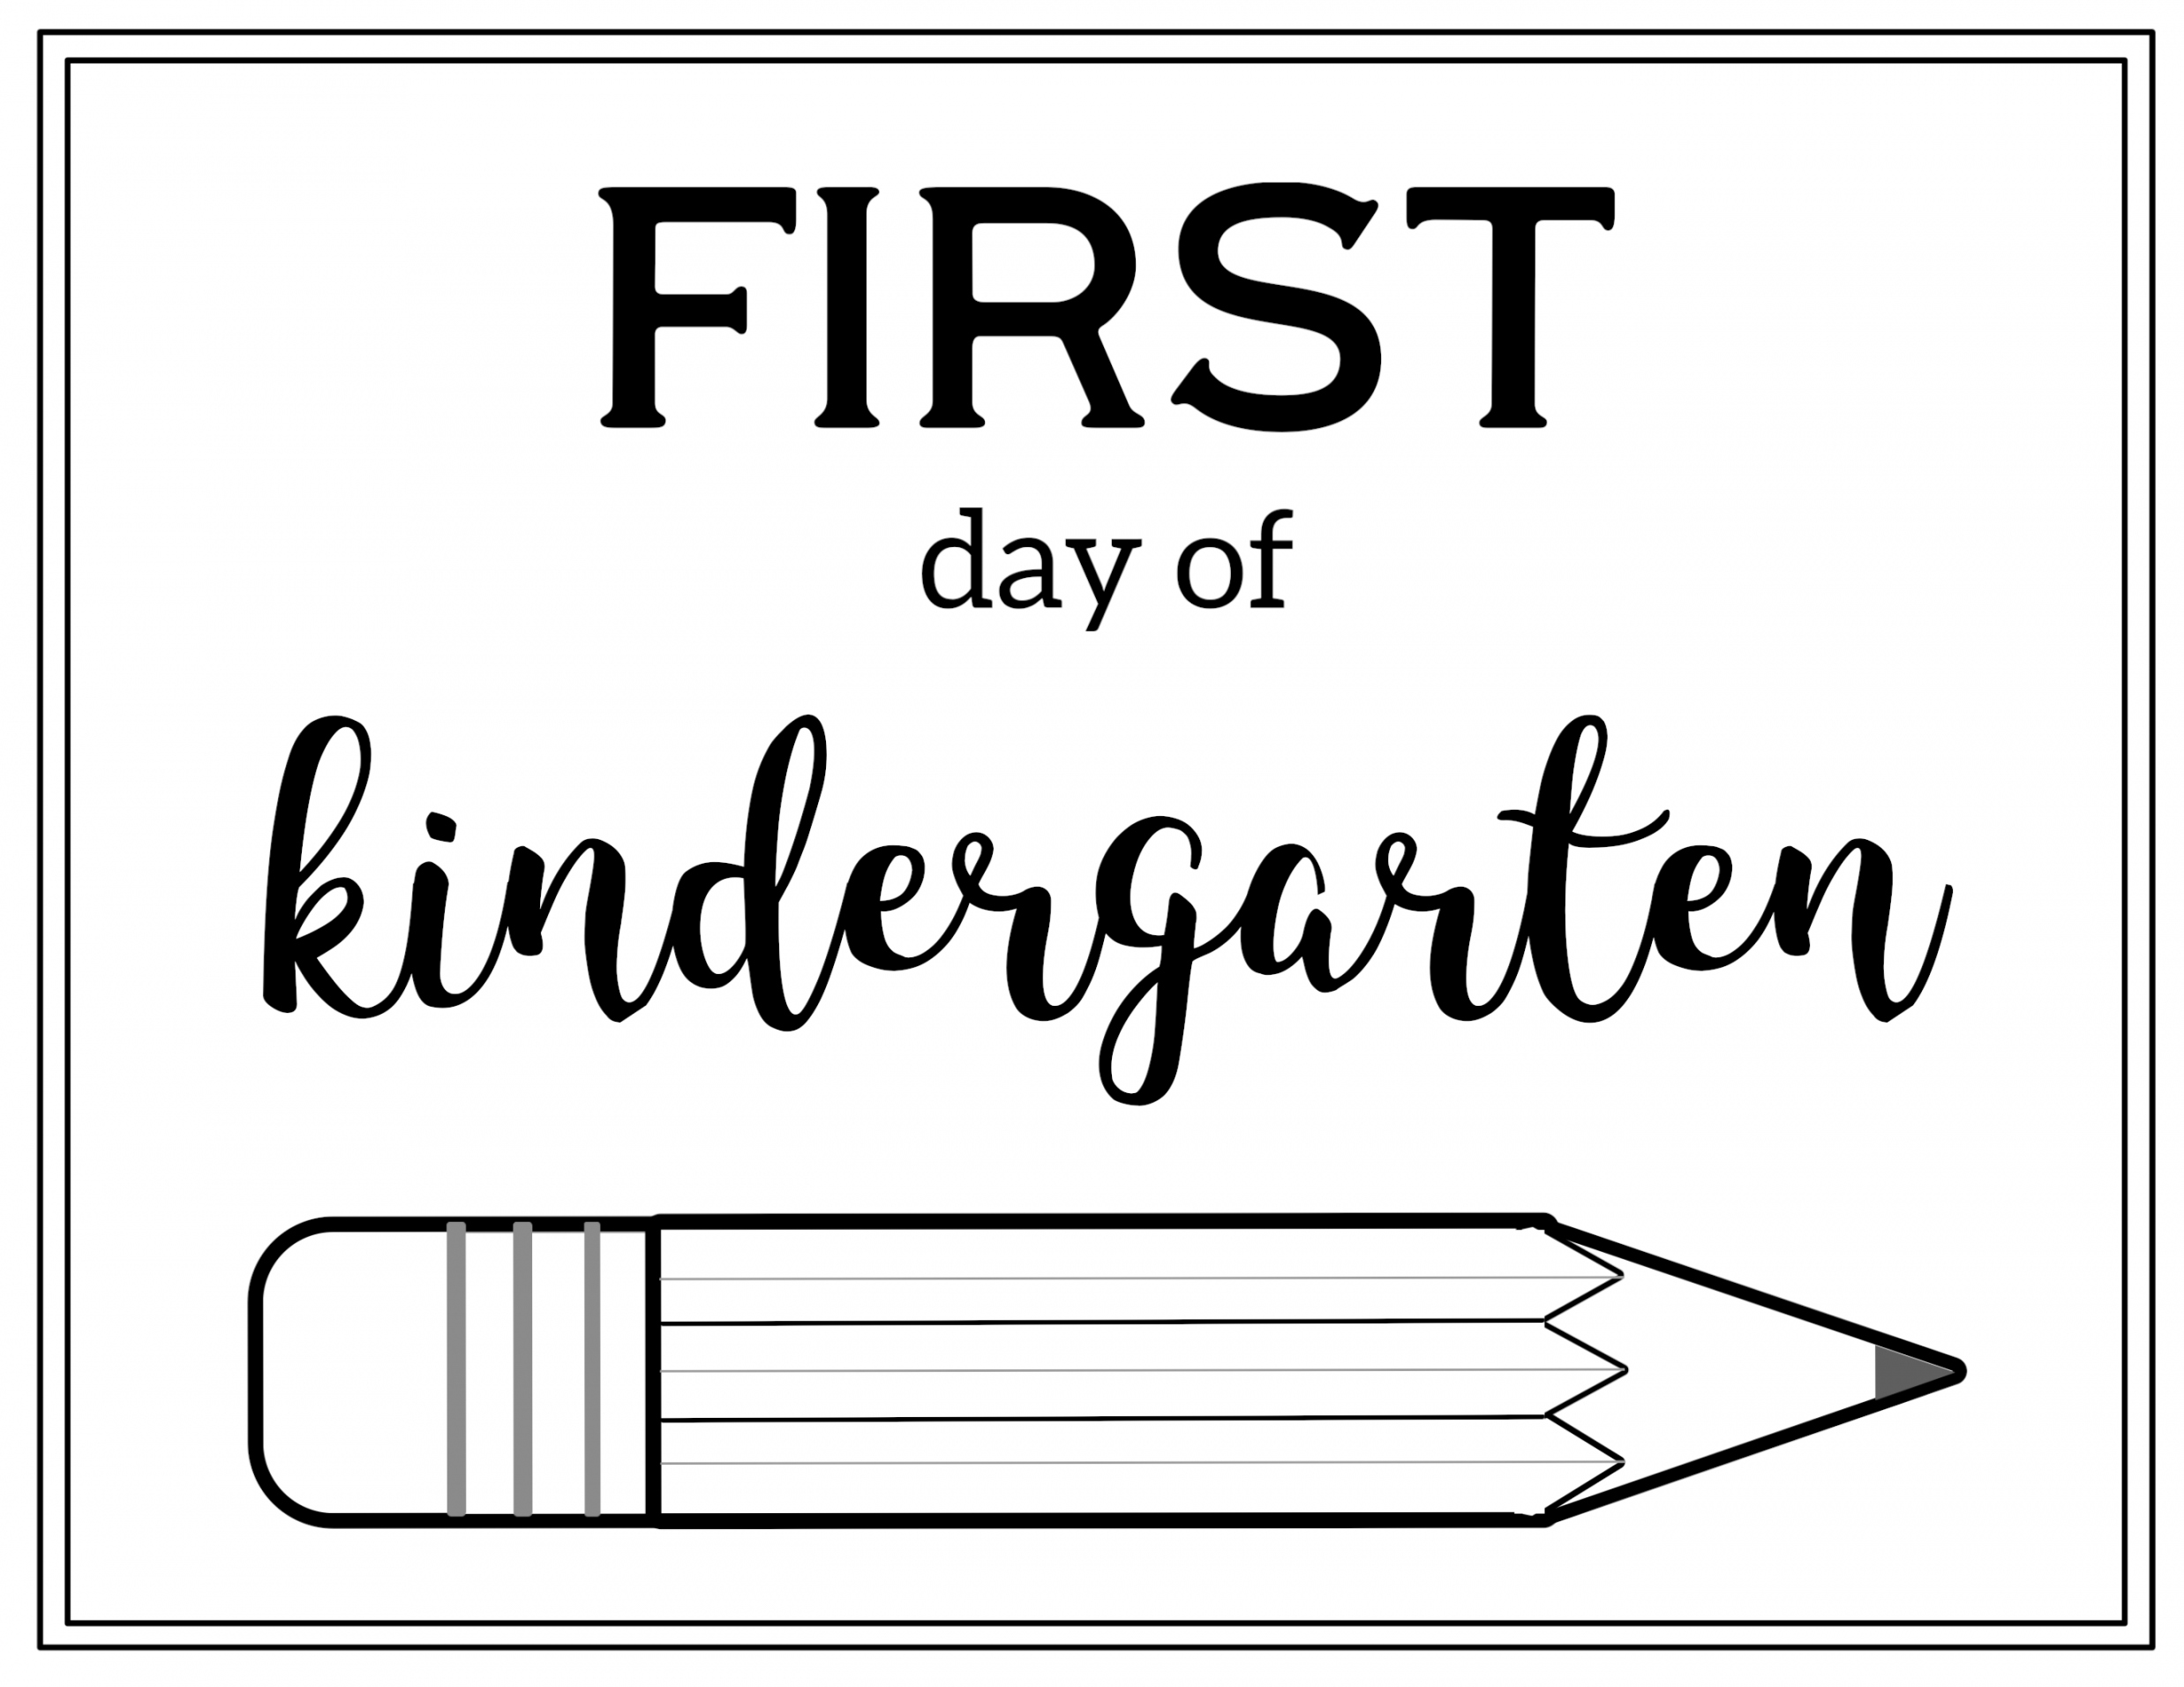 Free Printable First Day of School Sign Pencil - Paper Trail Design - FREE Printables - First Day Of Kindergarten Free Printable